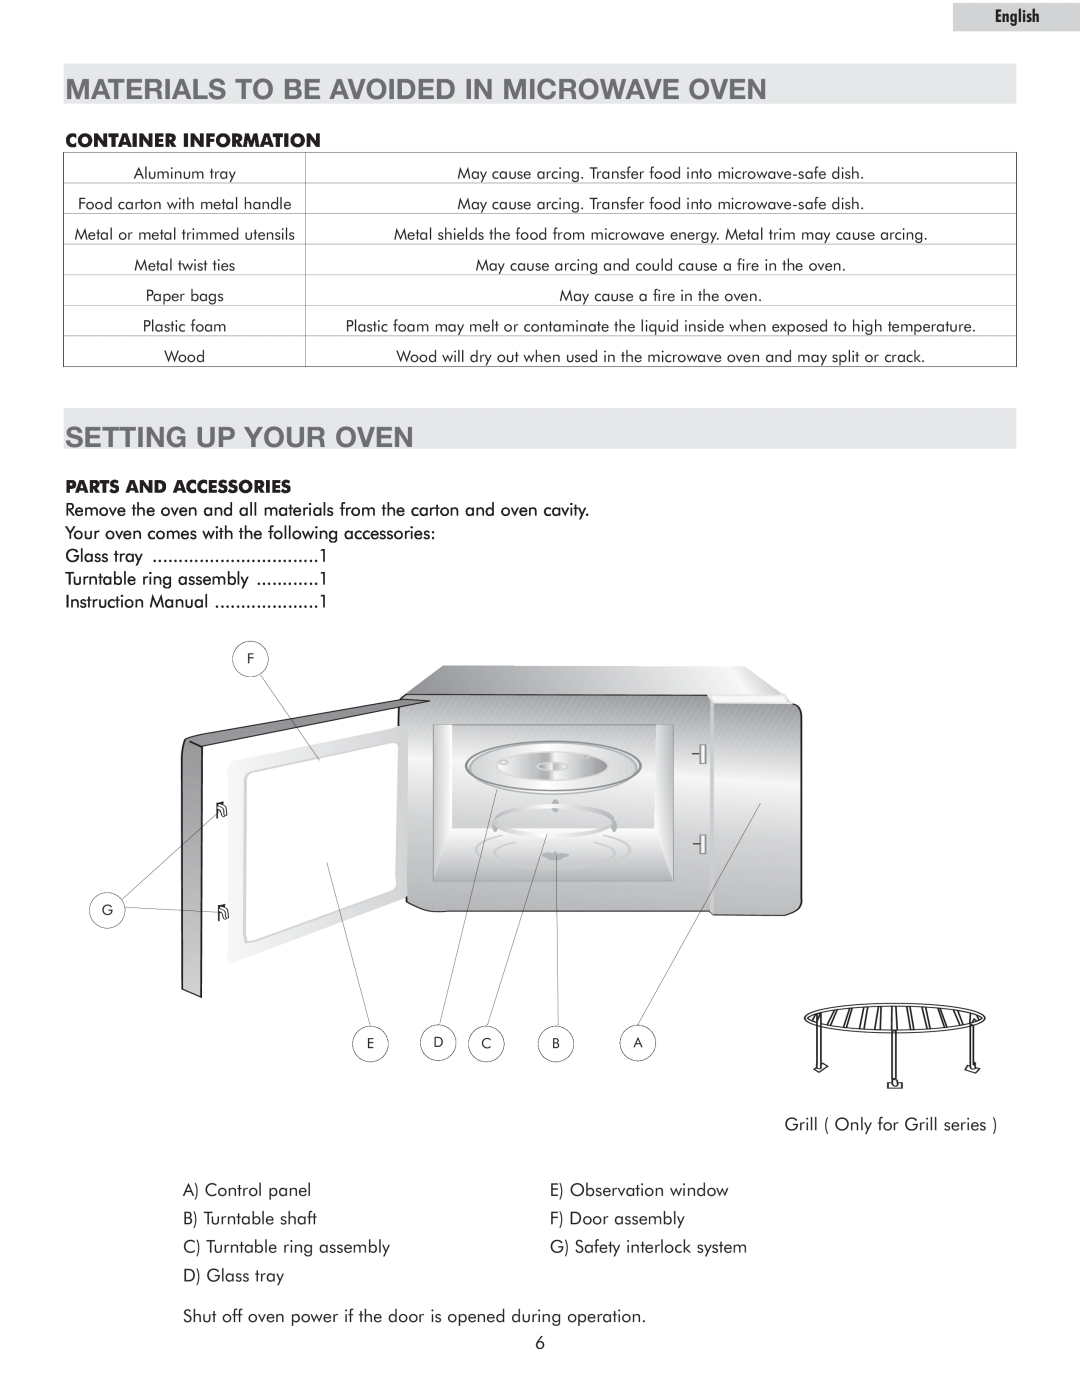 Haier MWM10100GCSS Materials To Be Avoided In Microwave Oven, Setting Up Your Oven, Container Information, English 